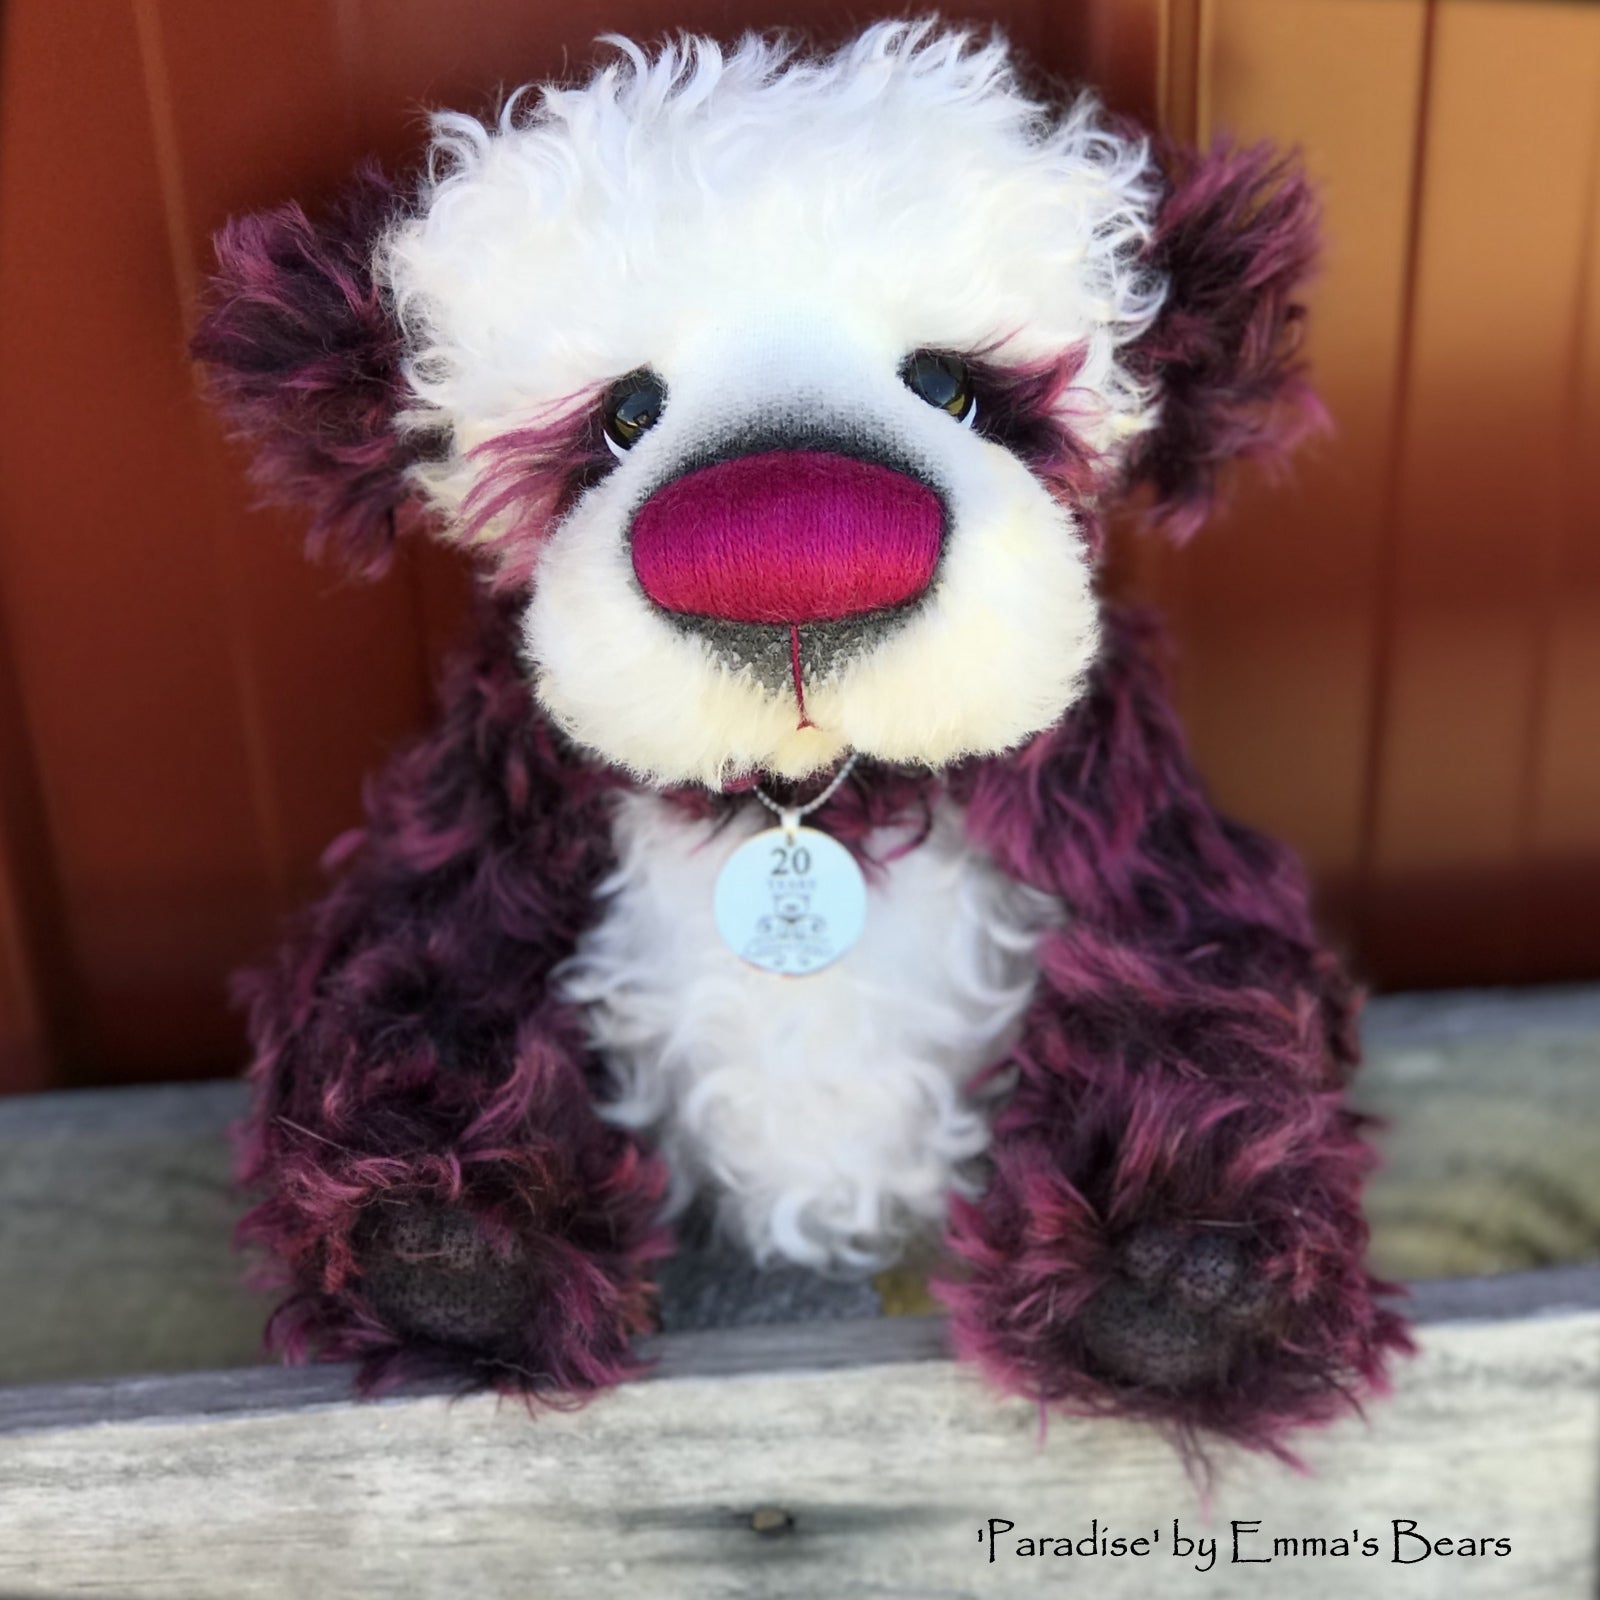 Paradise - 20 Years of Emma's Bears Commemorative Teddy - OOAK in a series